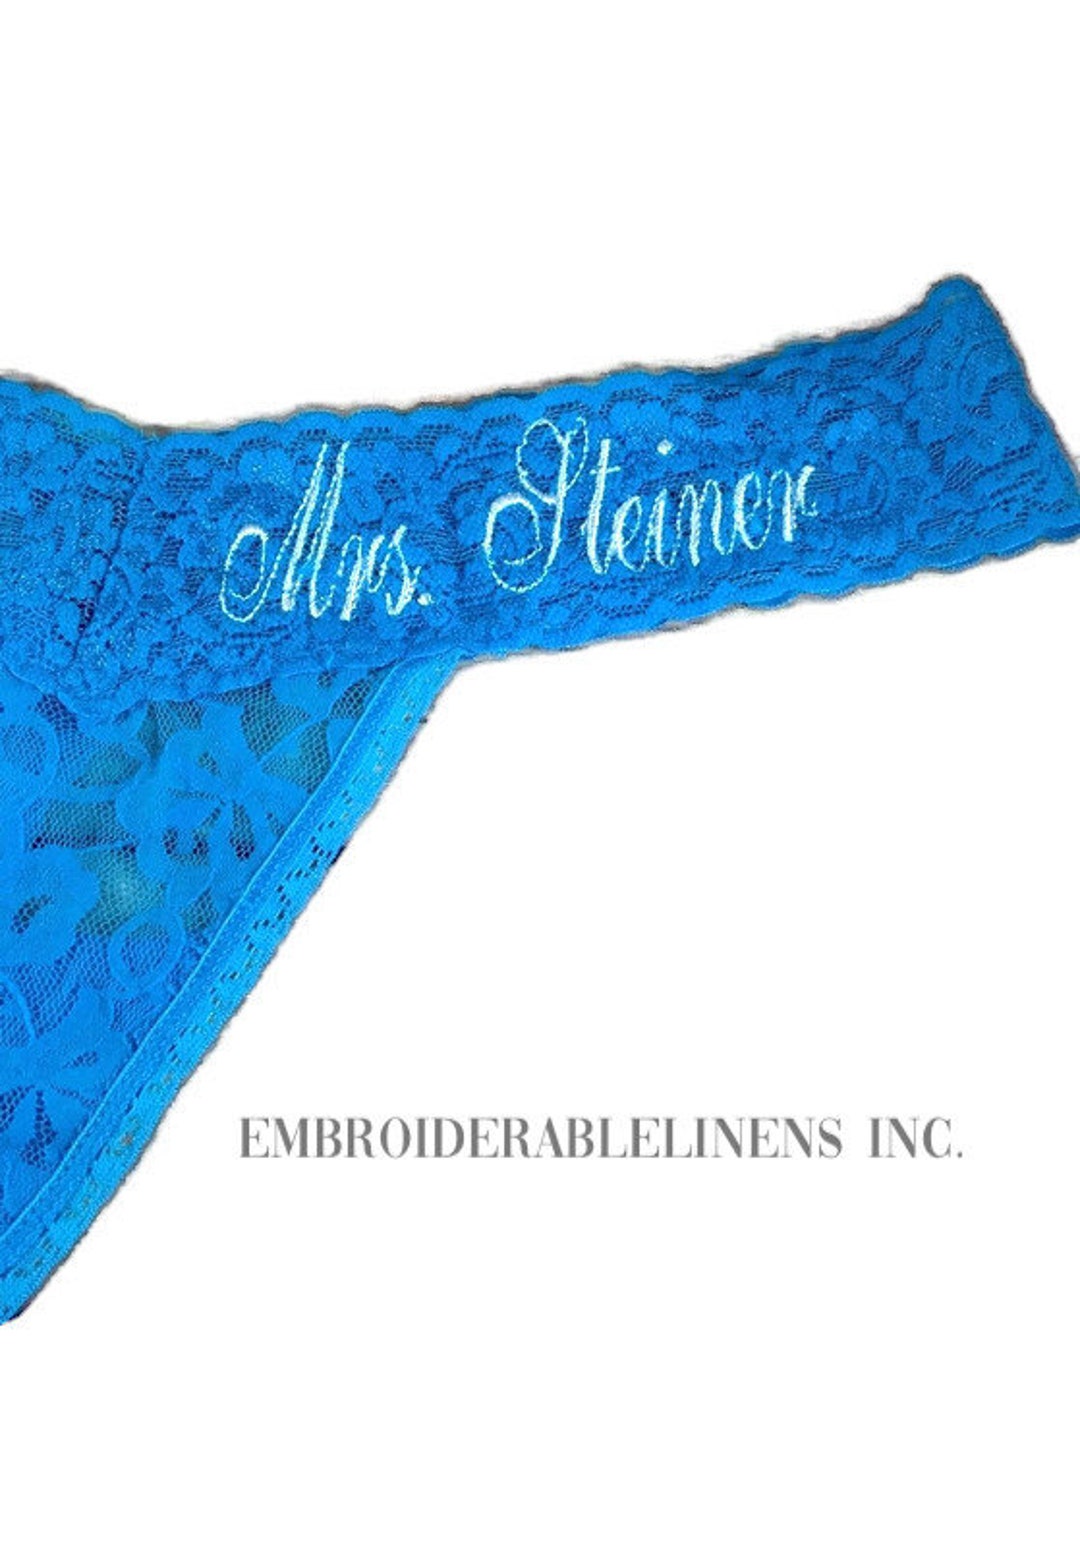 Personalized Lace Thong, You Choose Your Color Thong, Font, Thread Color,  Words or Name. Great Wedding or Personal Gift. 